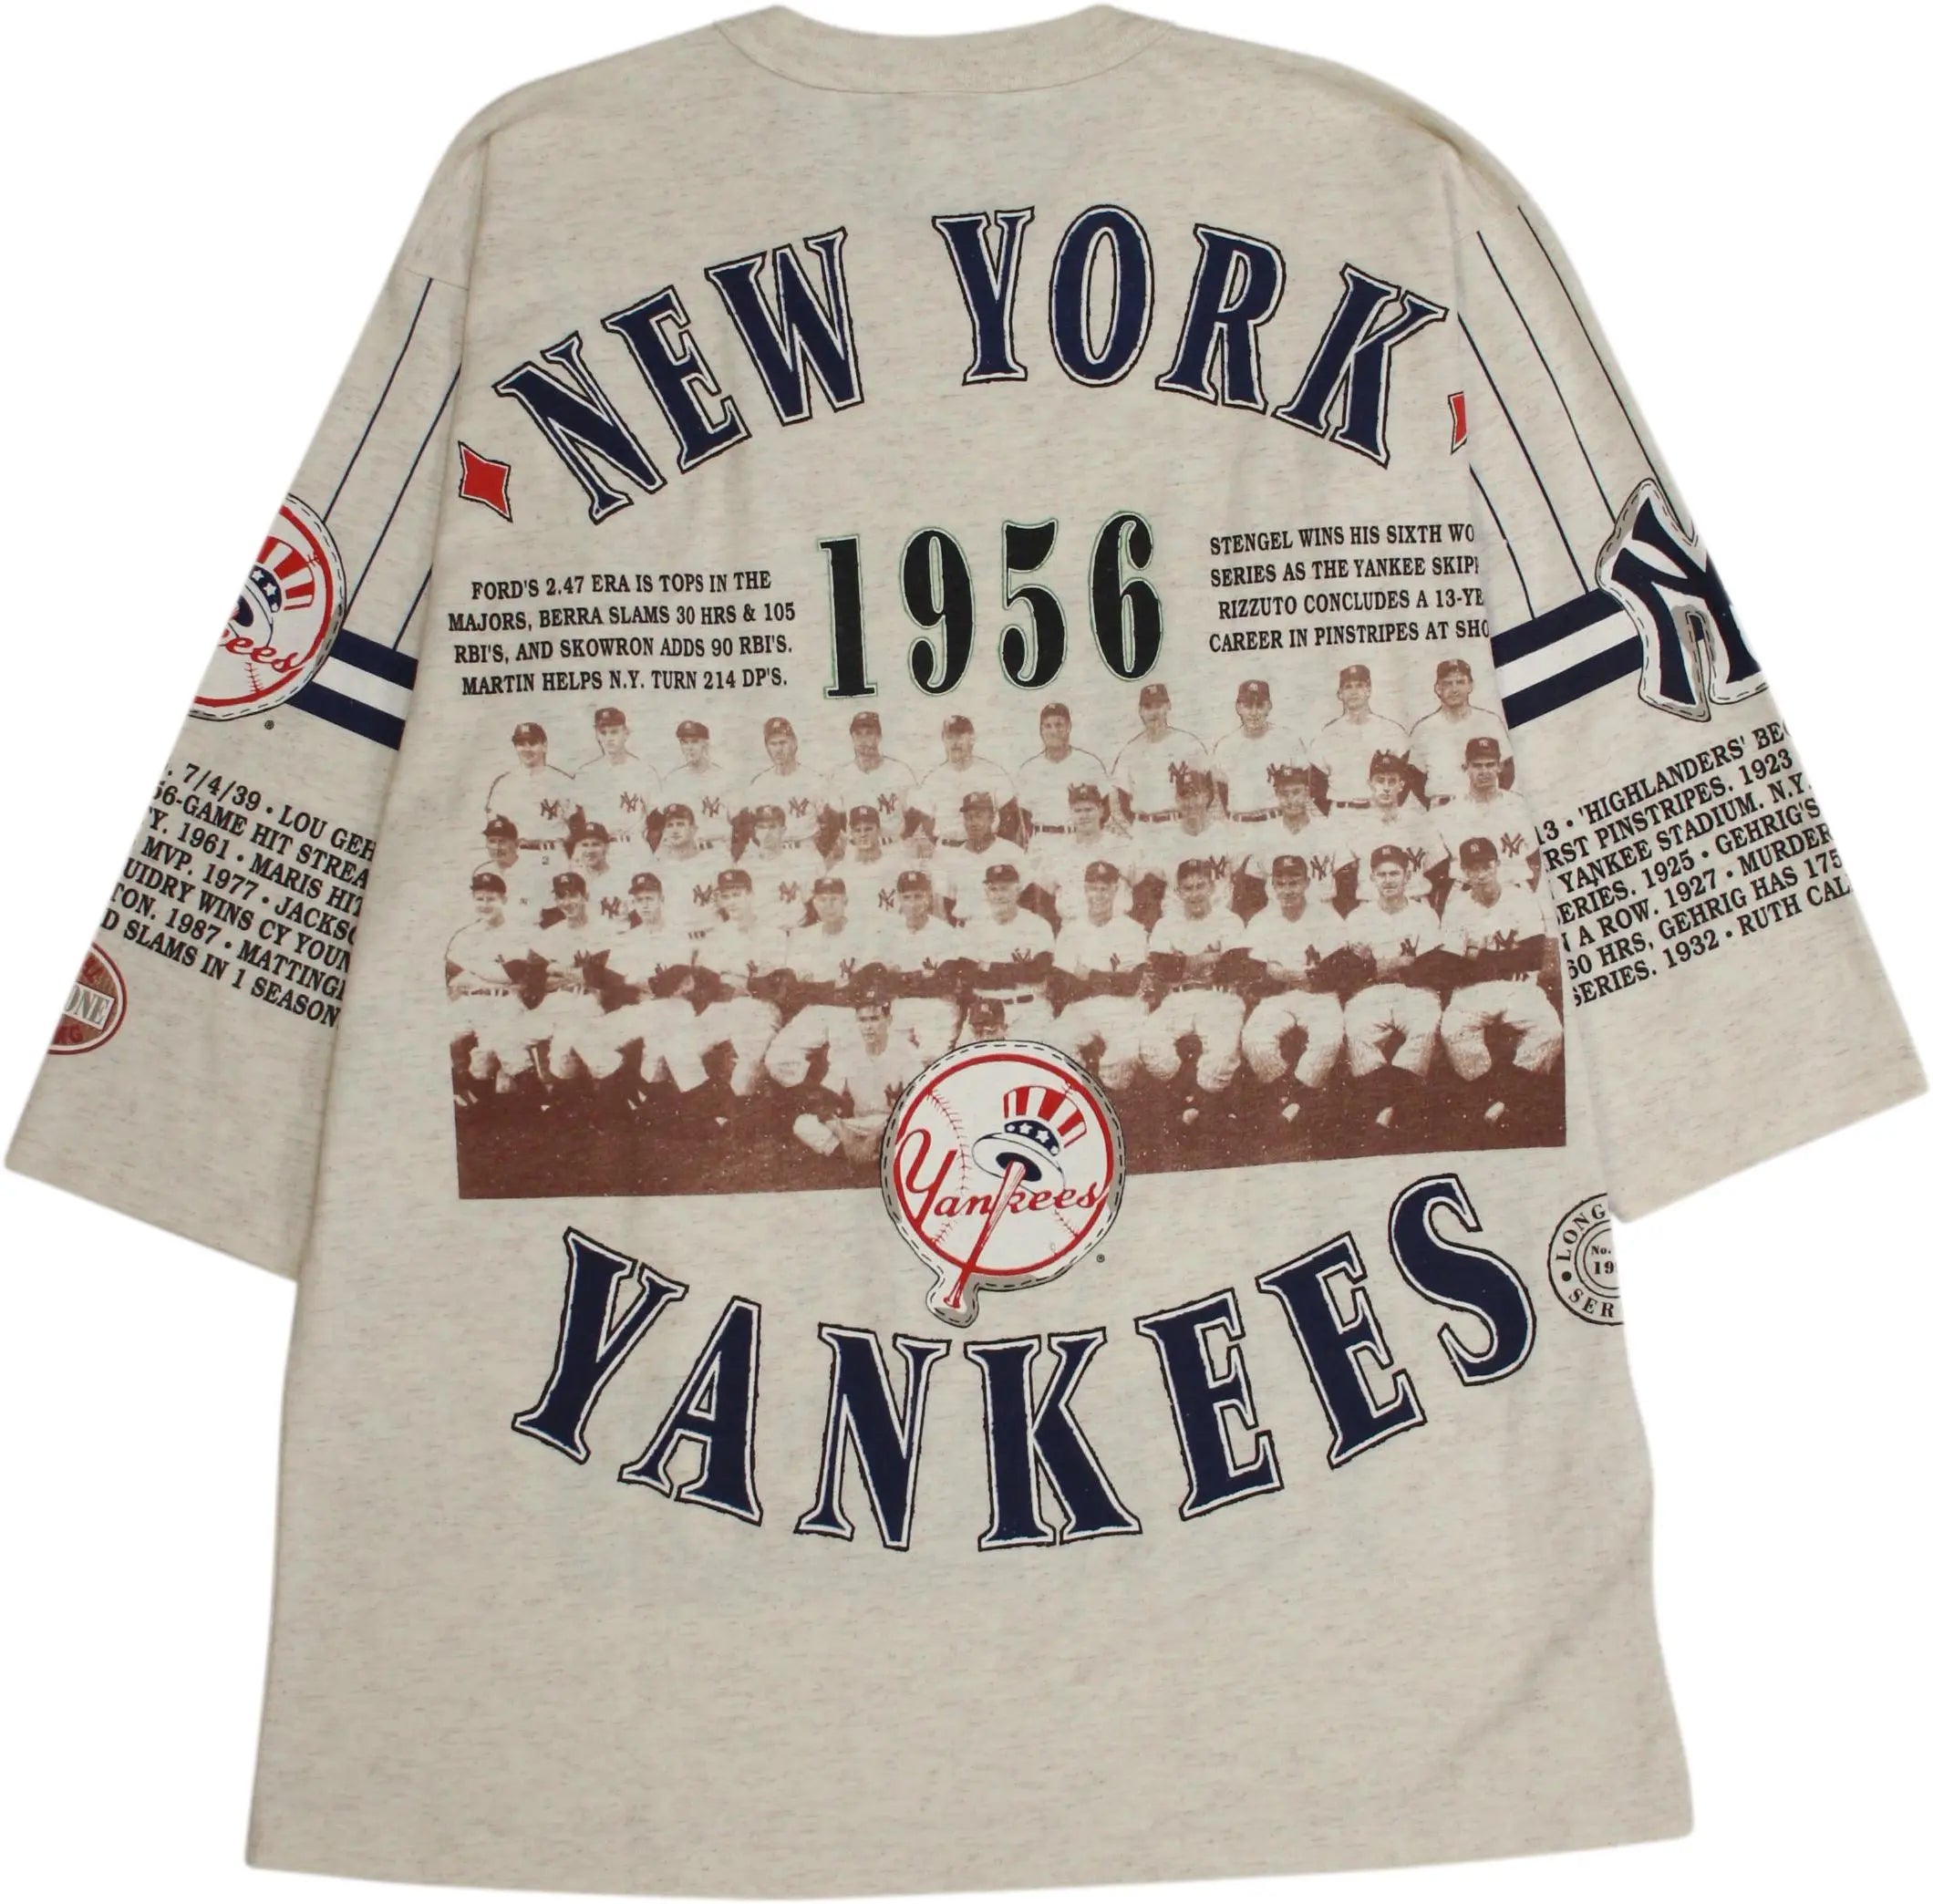 Long Gone - Rare Vintage New York Yankees 1956 T-shirt- ThriftTale.com - Vintage and second handclothing